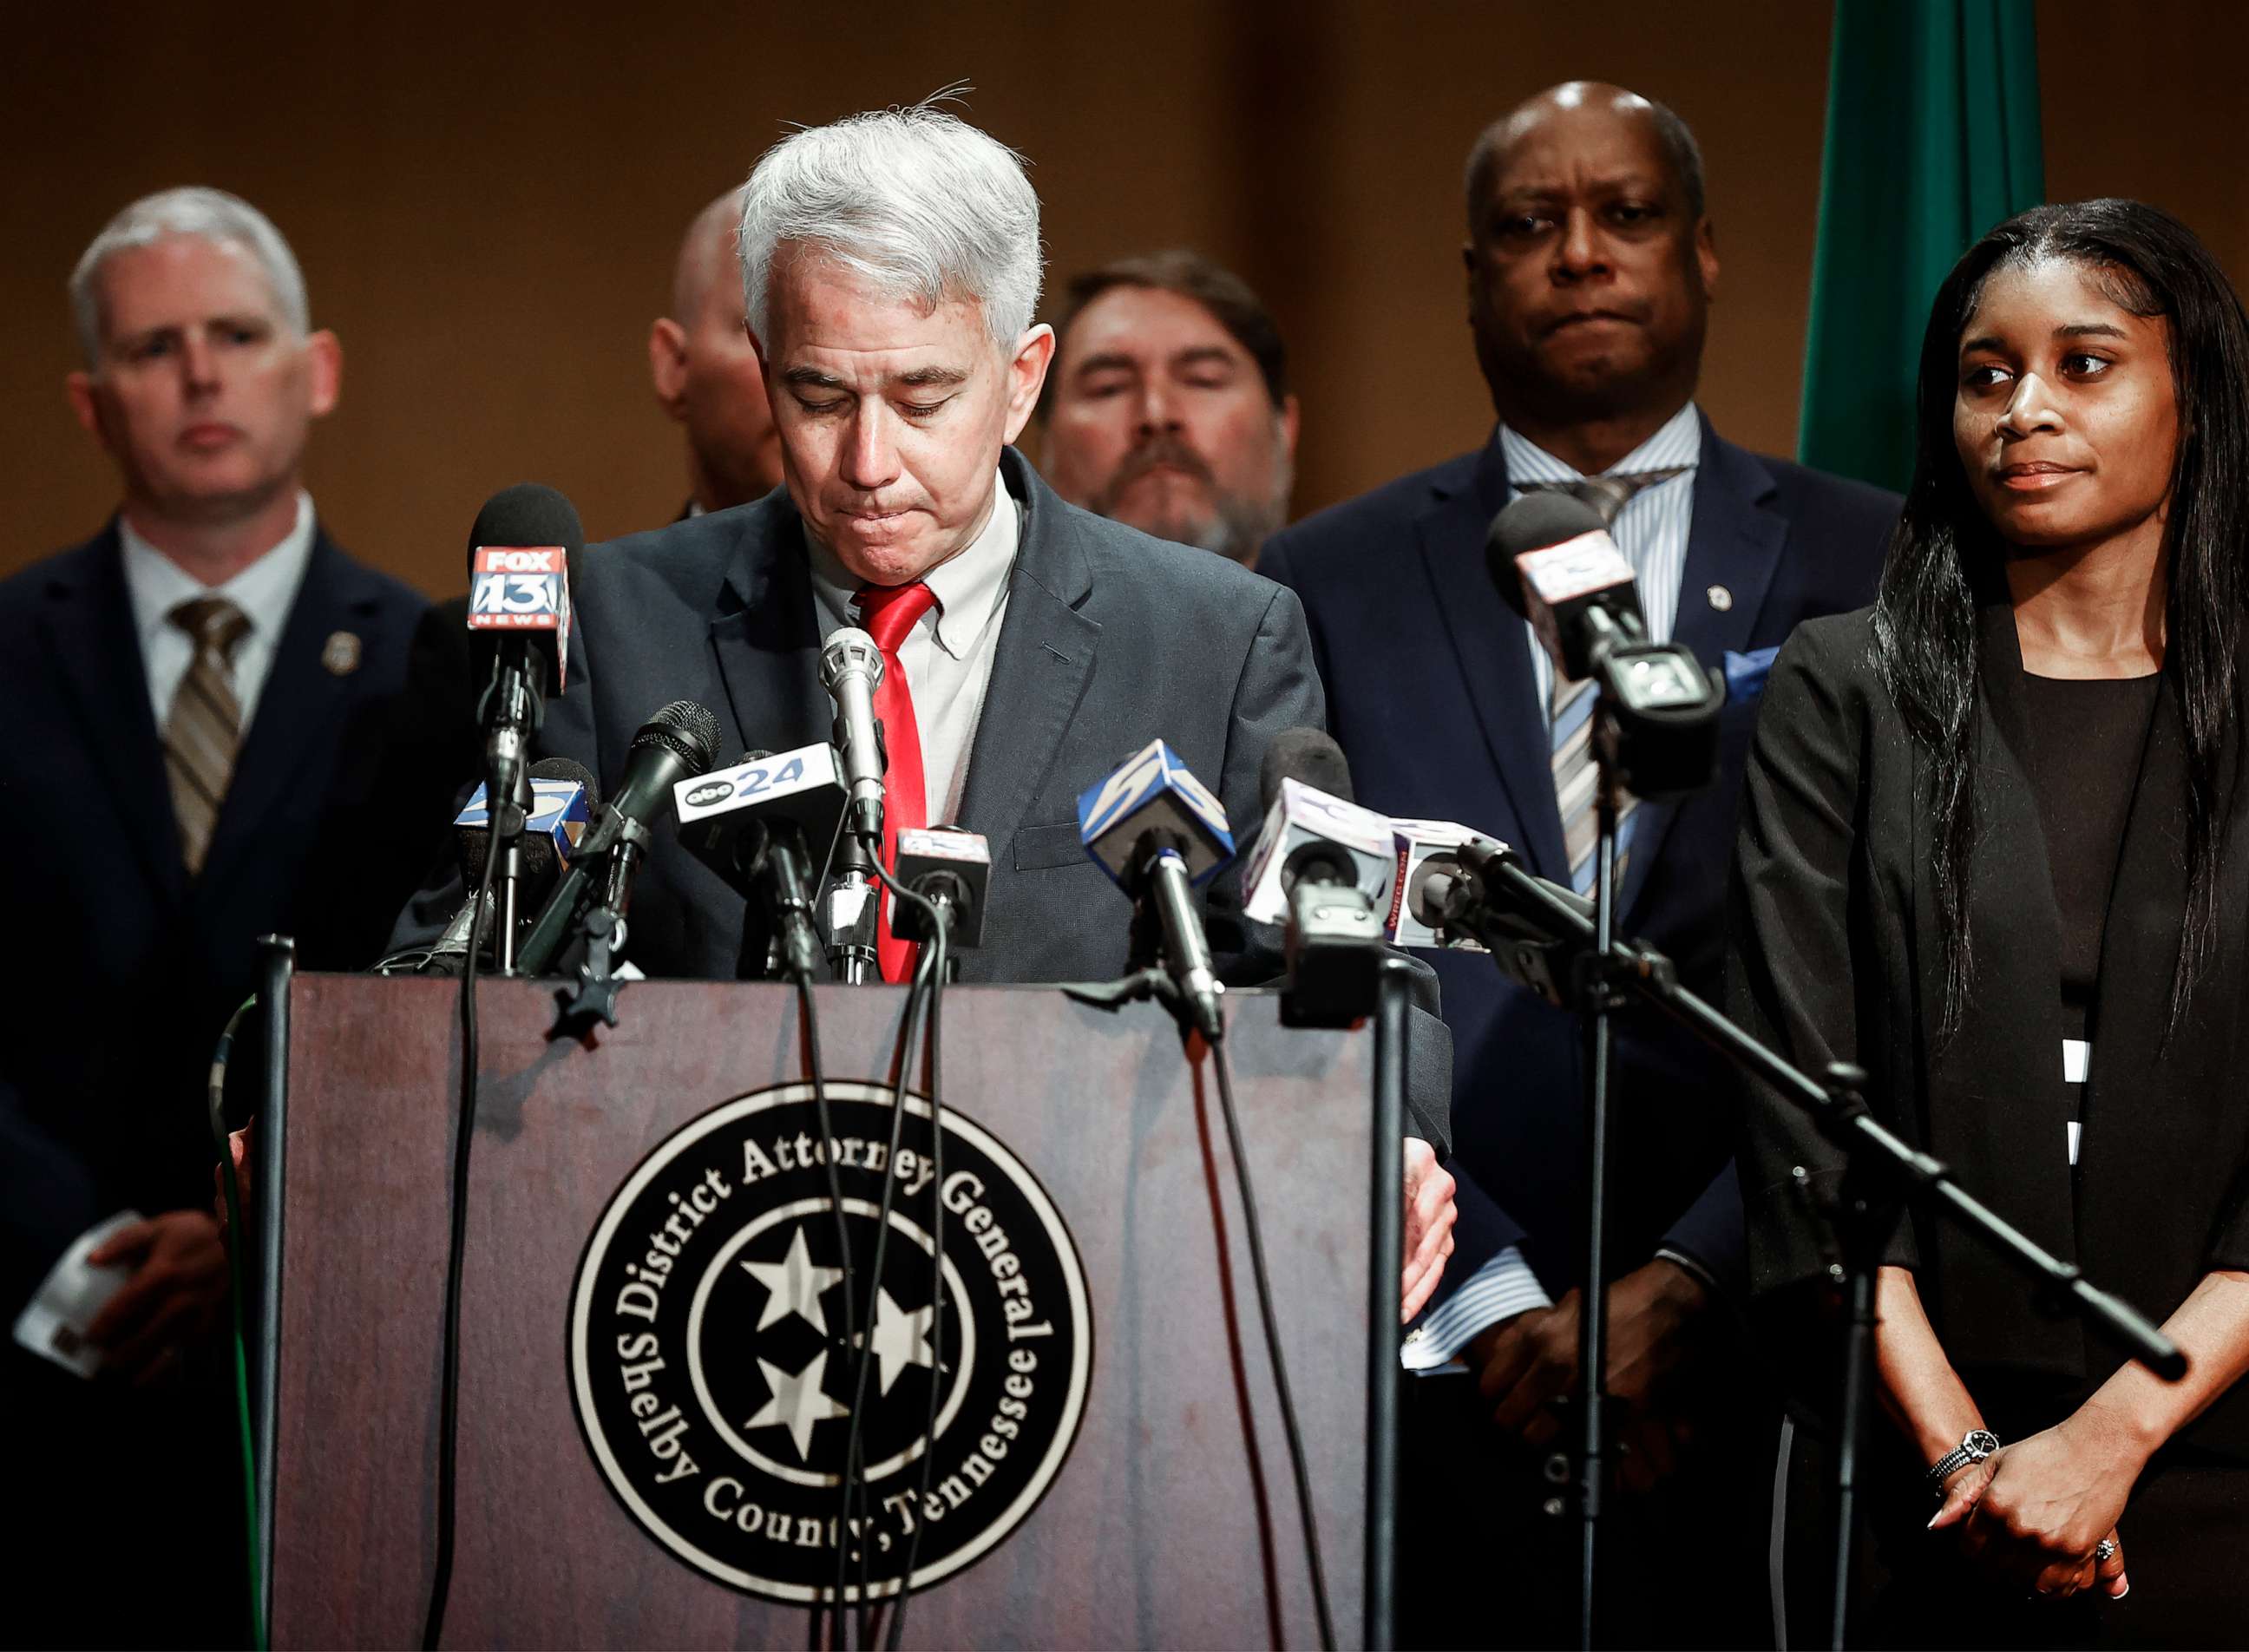 PHOTO: Shelby County District Attorney Steve Mulroy answers questions during a press conference on Thursday, Jan. 26, 2023, after five fired Memphis Police Officers were charged in the murder of Black motorist Tyre Nichols.